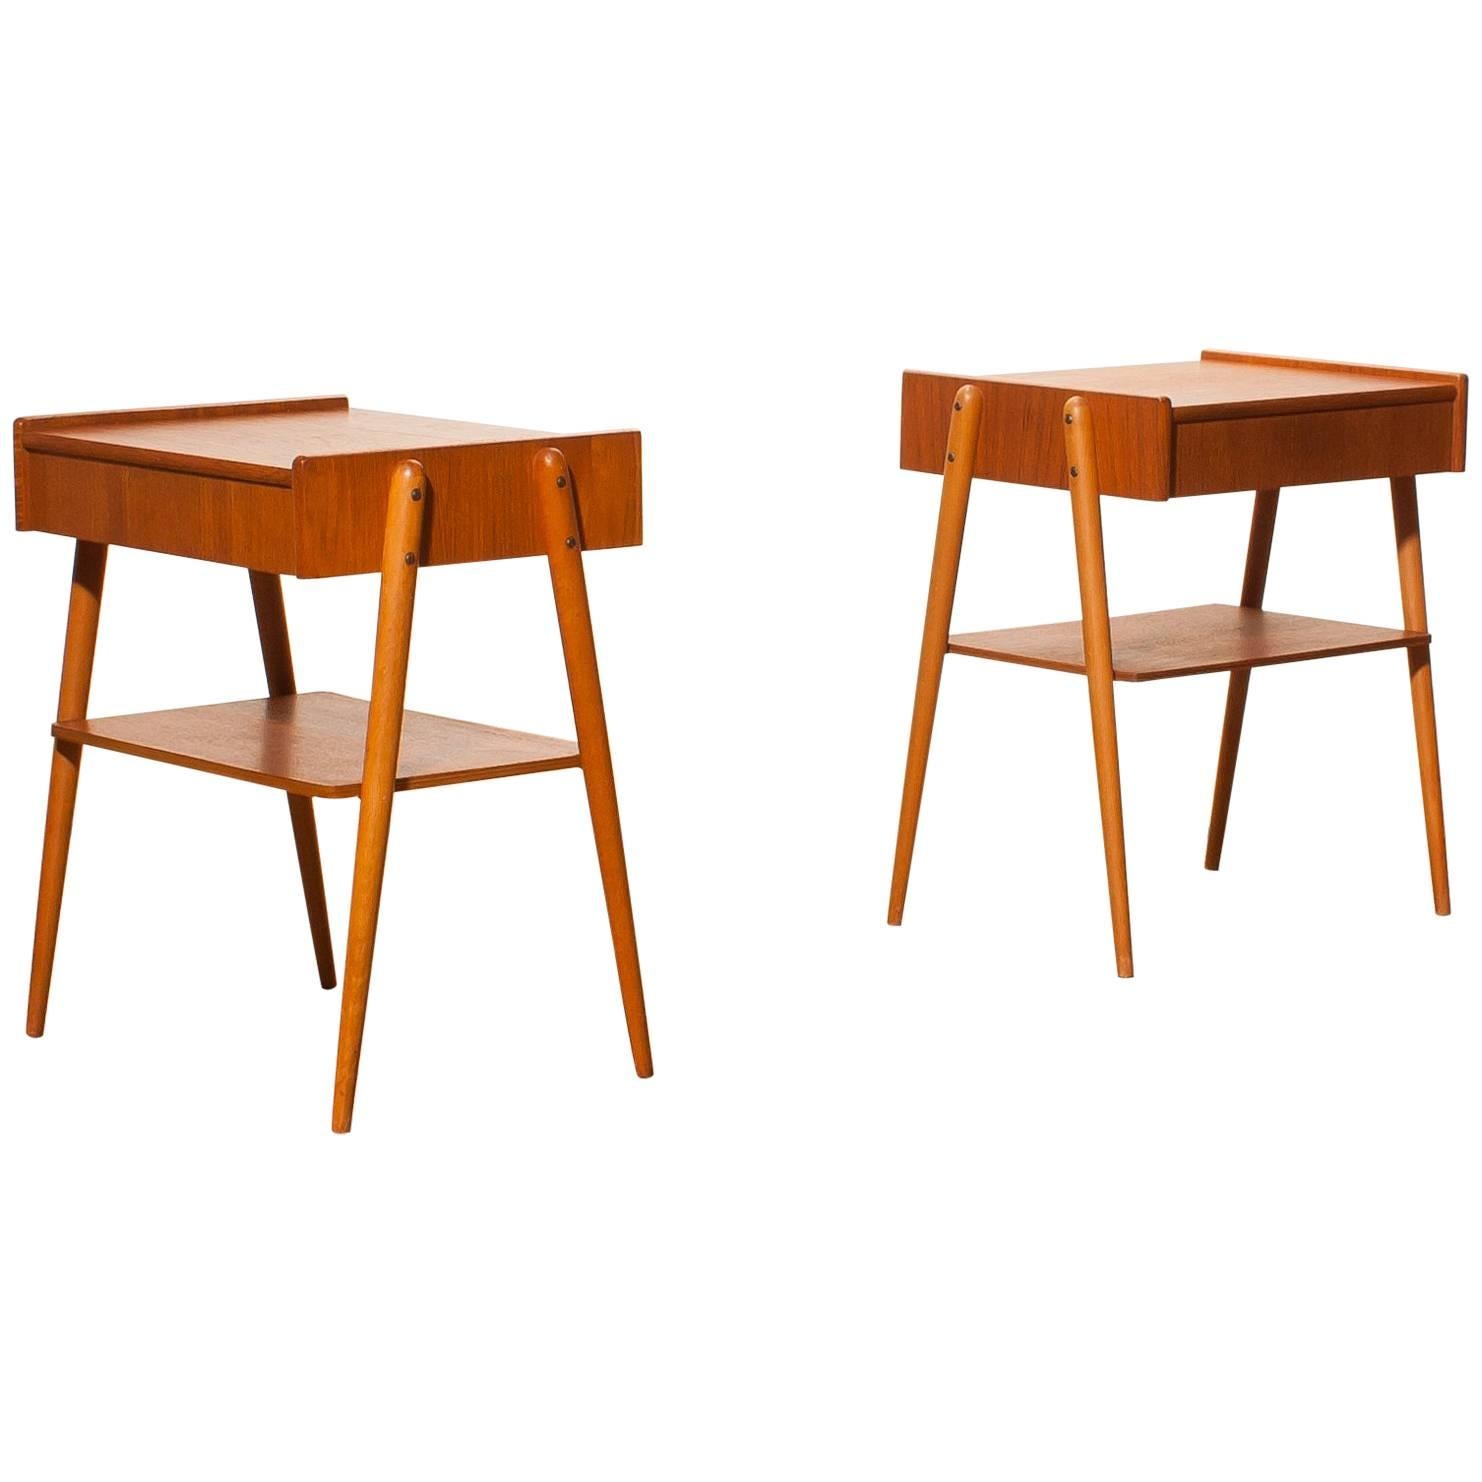 1960s, a Pair of Teak Bedside Tables